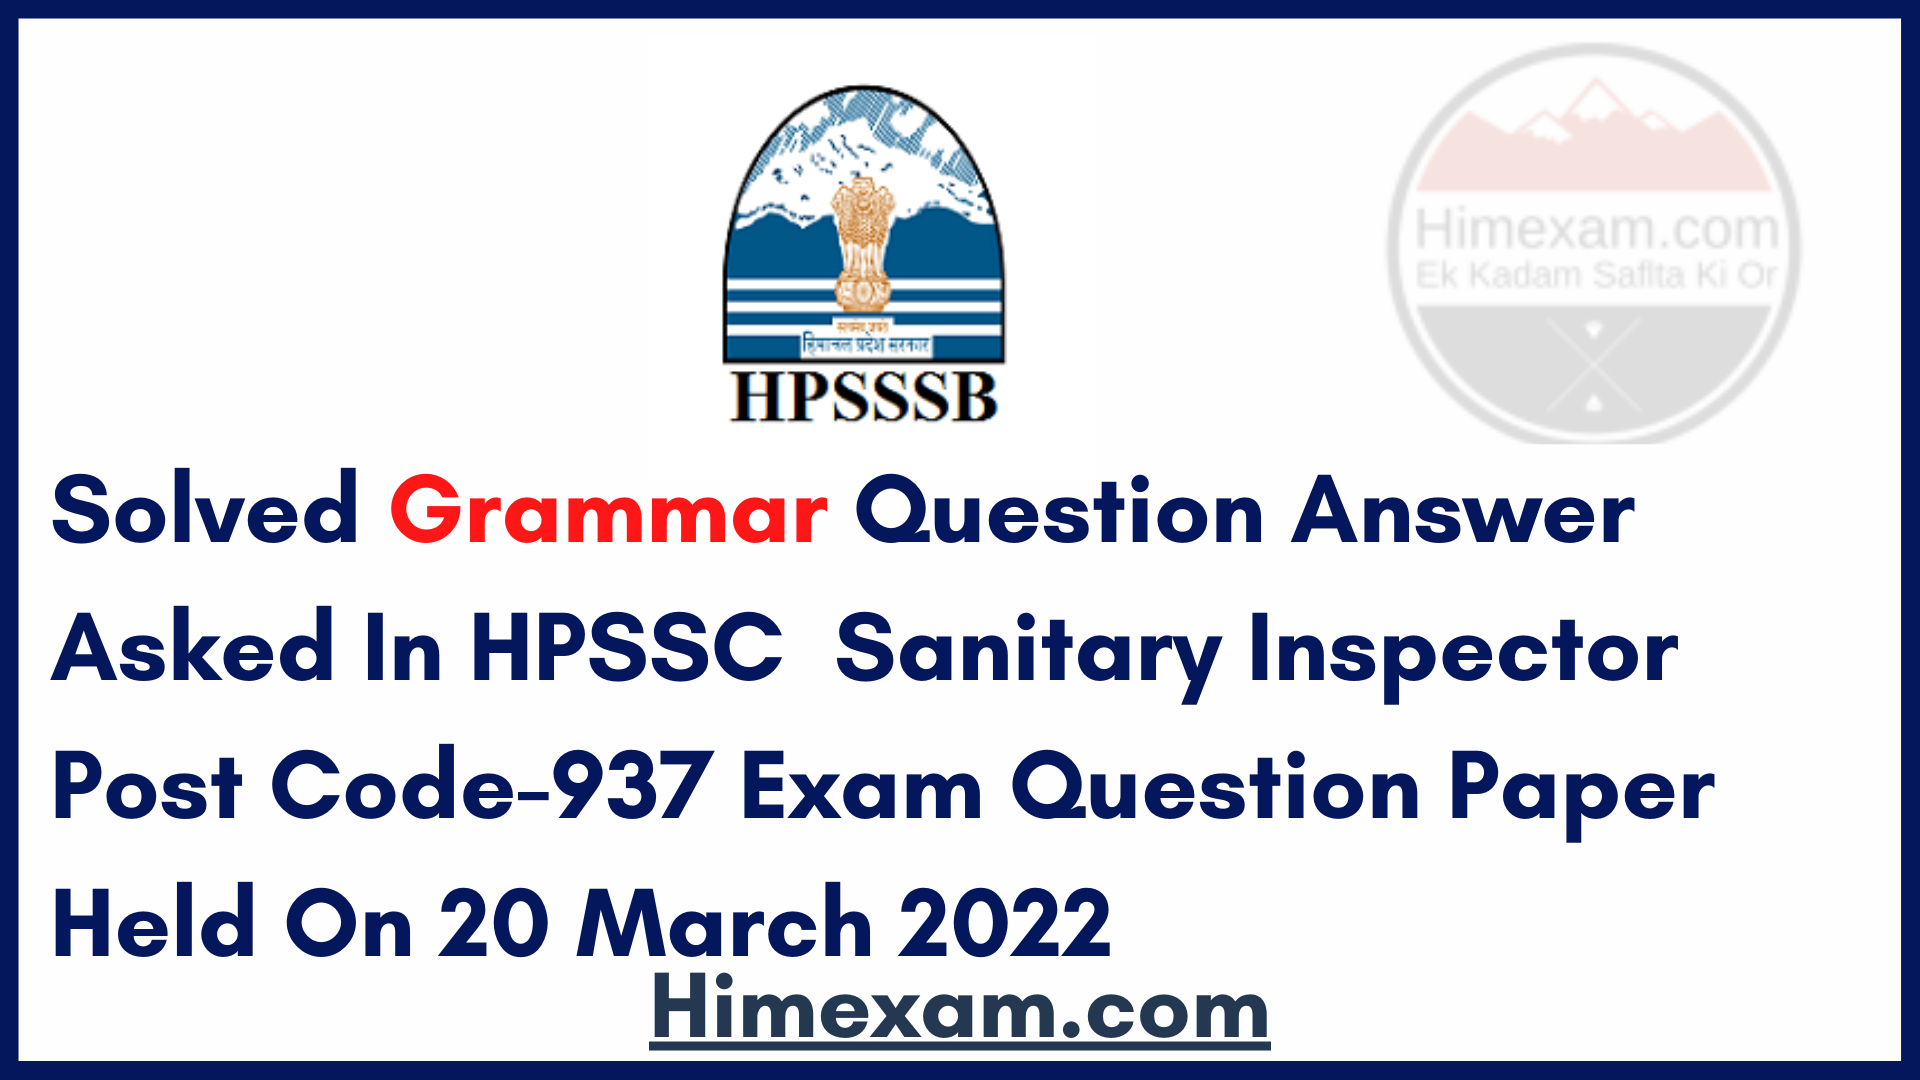 Solved Grammar Question Answer Asked In HPSSC  Sanitary Inspector Post Code-937  Exam Question Paper Held On 20 March 2022